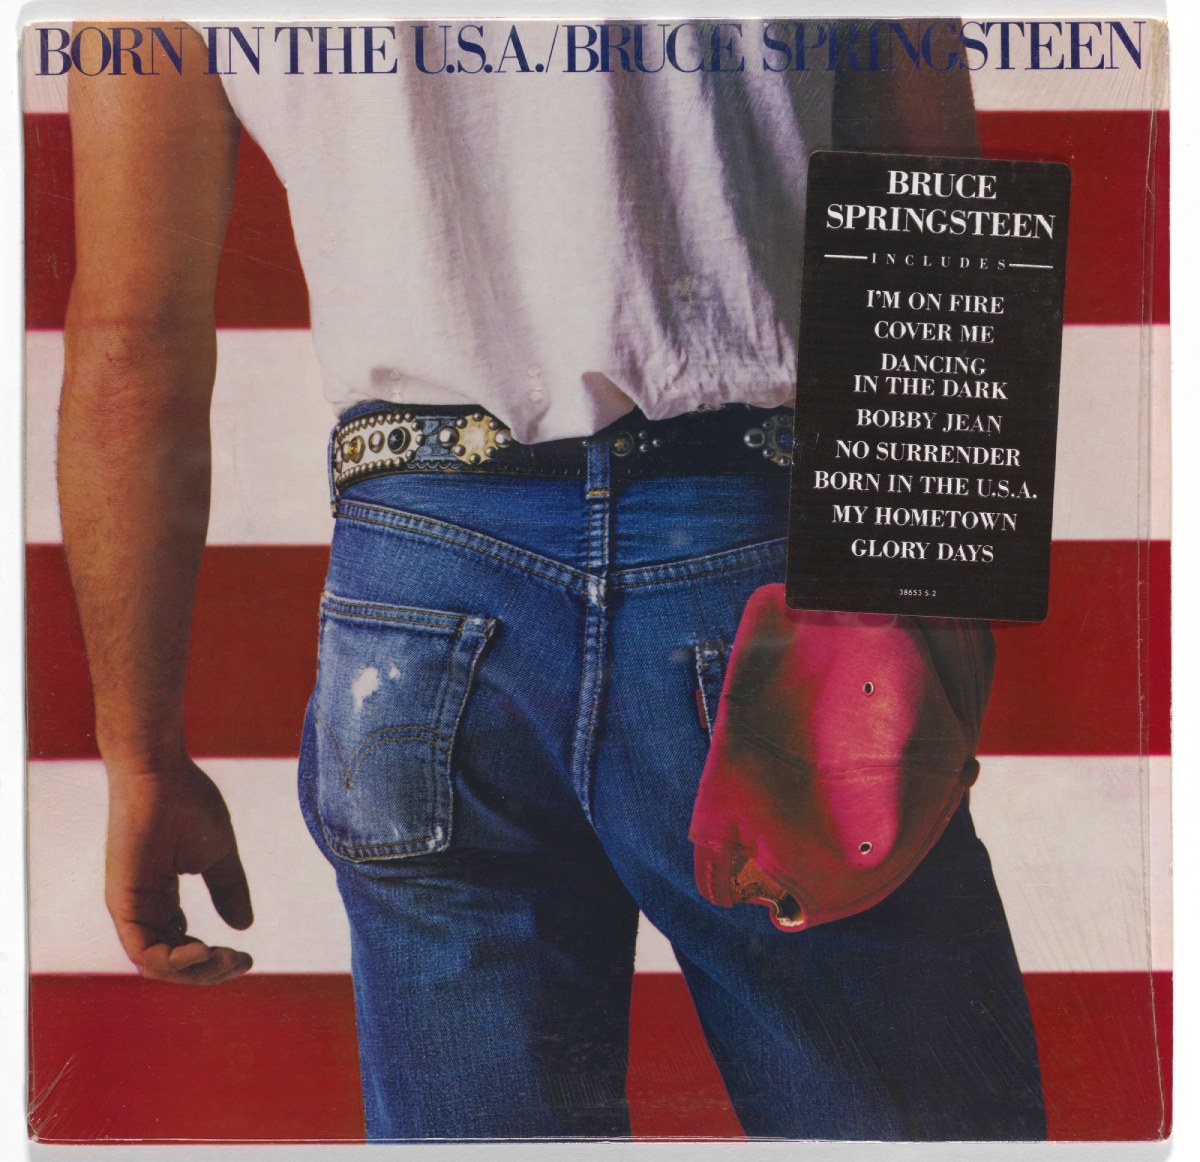 Bruce Springsteen - "Born in the U.S.A." (1984)